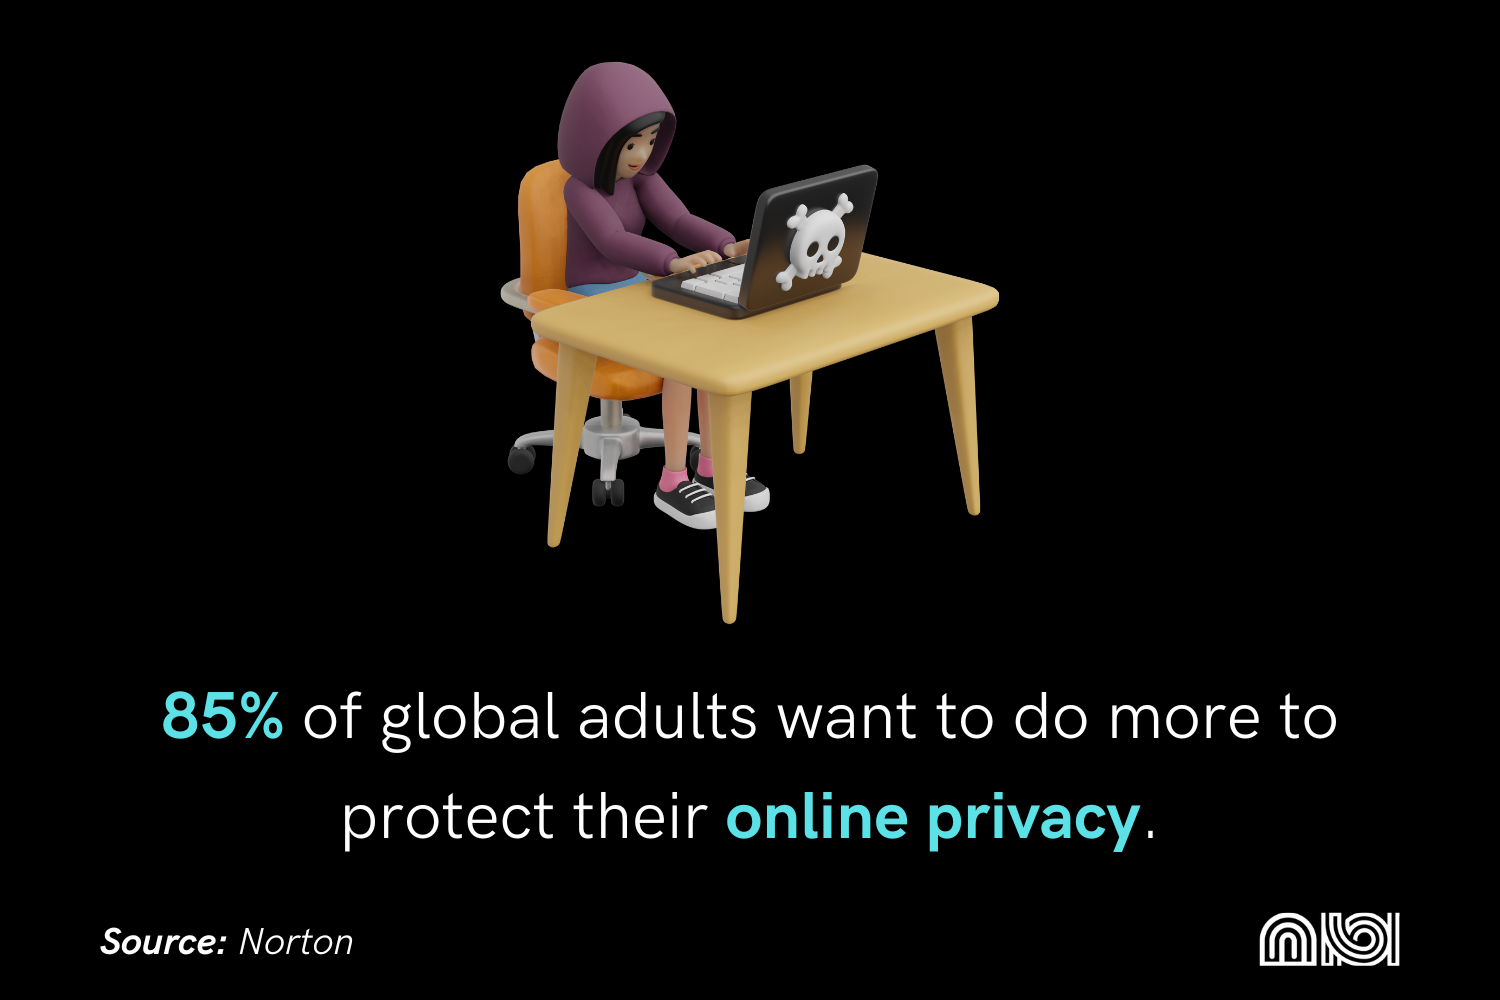 Statistic showing 85% global desire for online privacy protection.